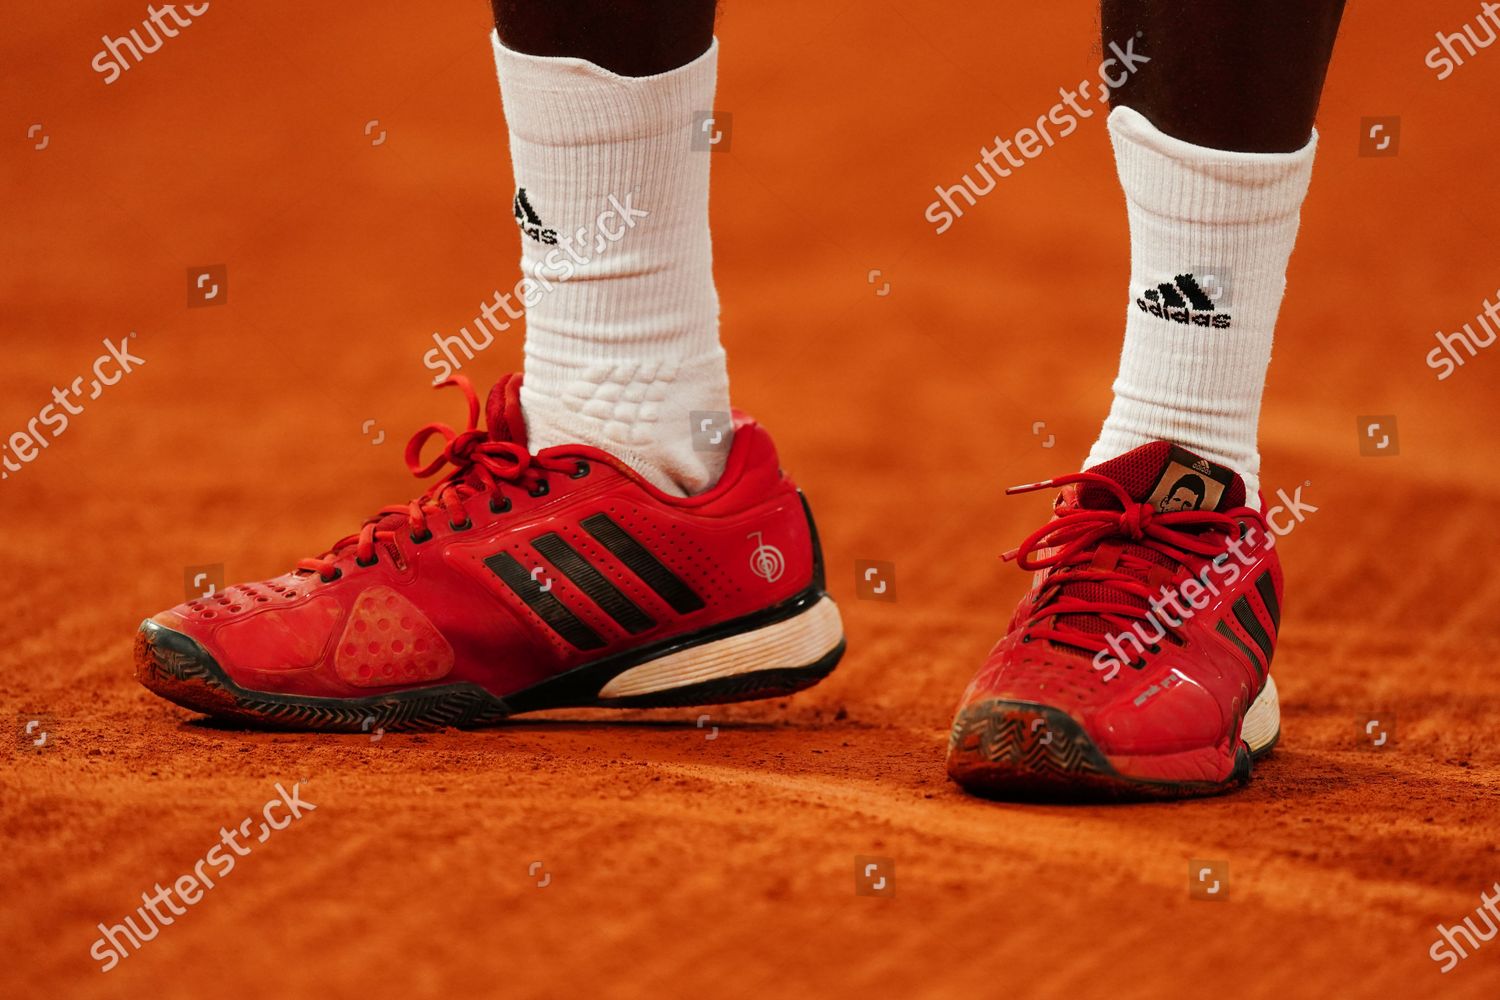 Mikael Ymer Wearing Djokovic Branded Tennis Shoes Editorial Stock Photo Stock Image Shutterstock